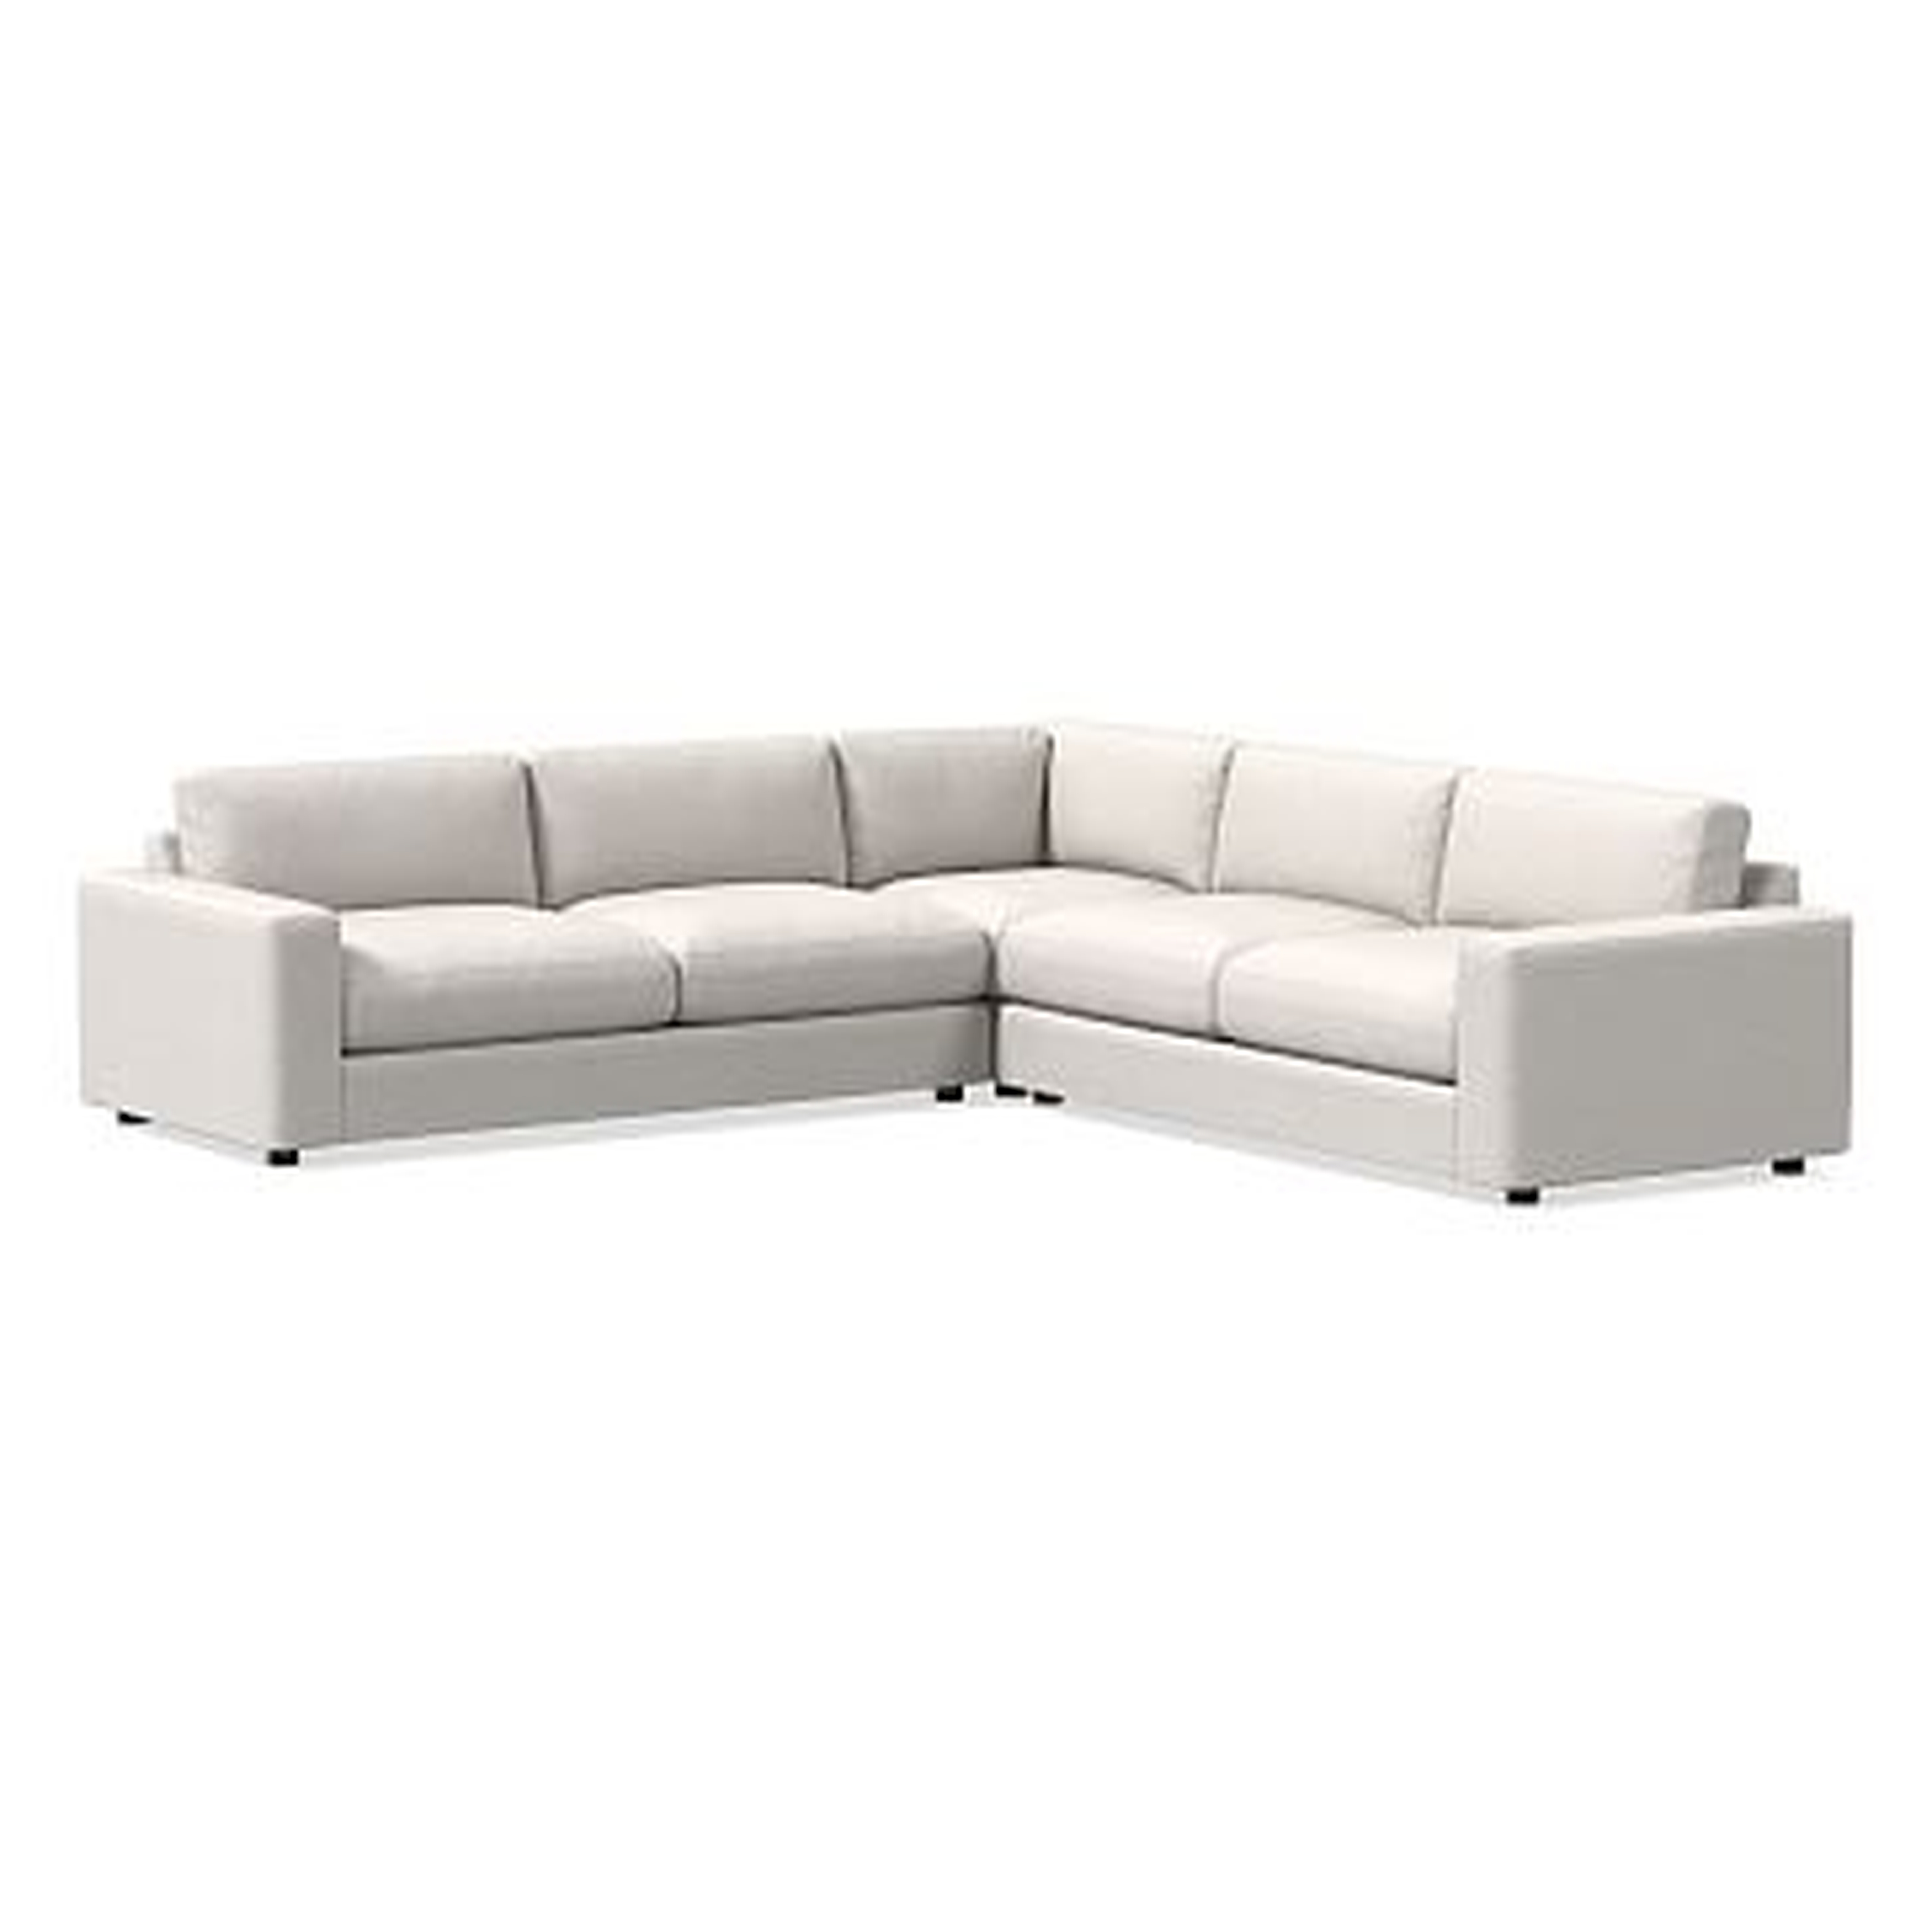 Urban Sectional Set 07: Left Arm 3 Seater Sofa, Corner, Right Arm 2 Seater Sofa, Poly, Performance Coastal Linen, White, Concealed Supports - West Elm